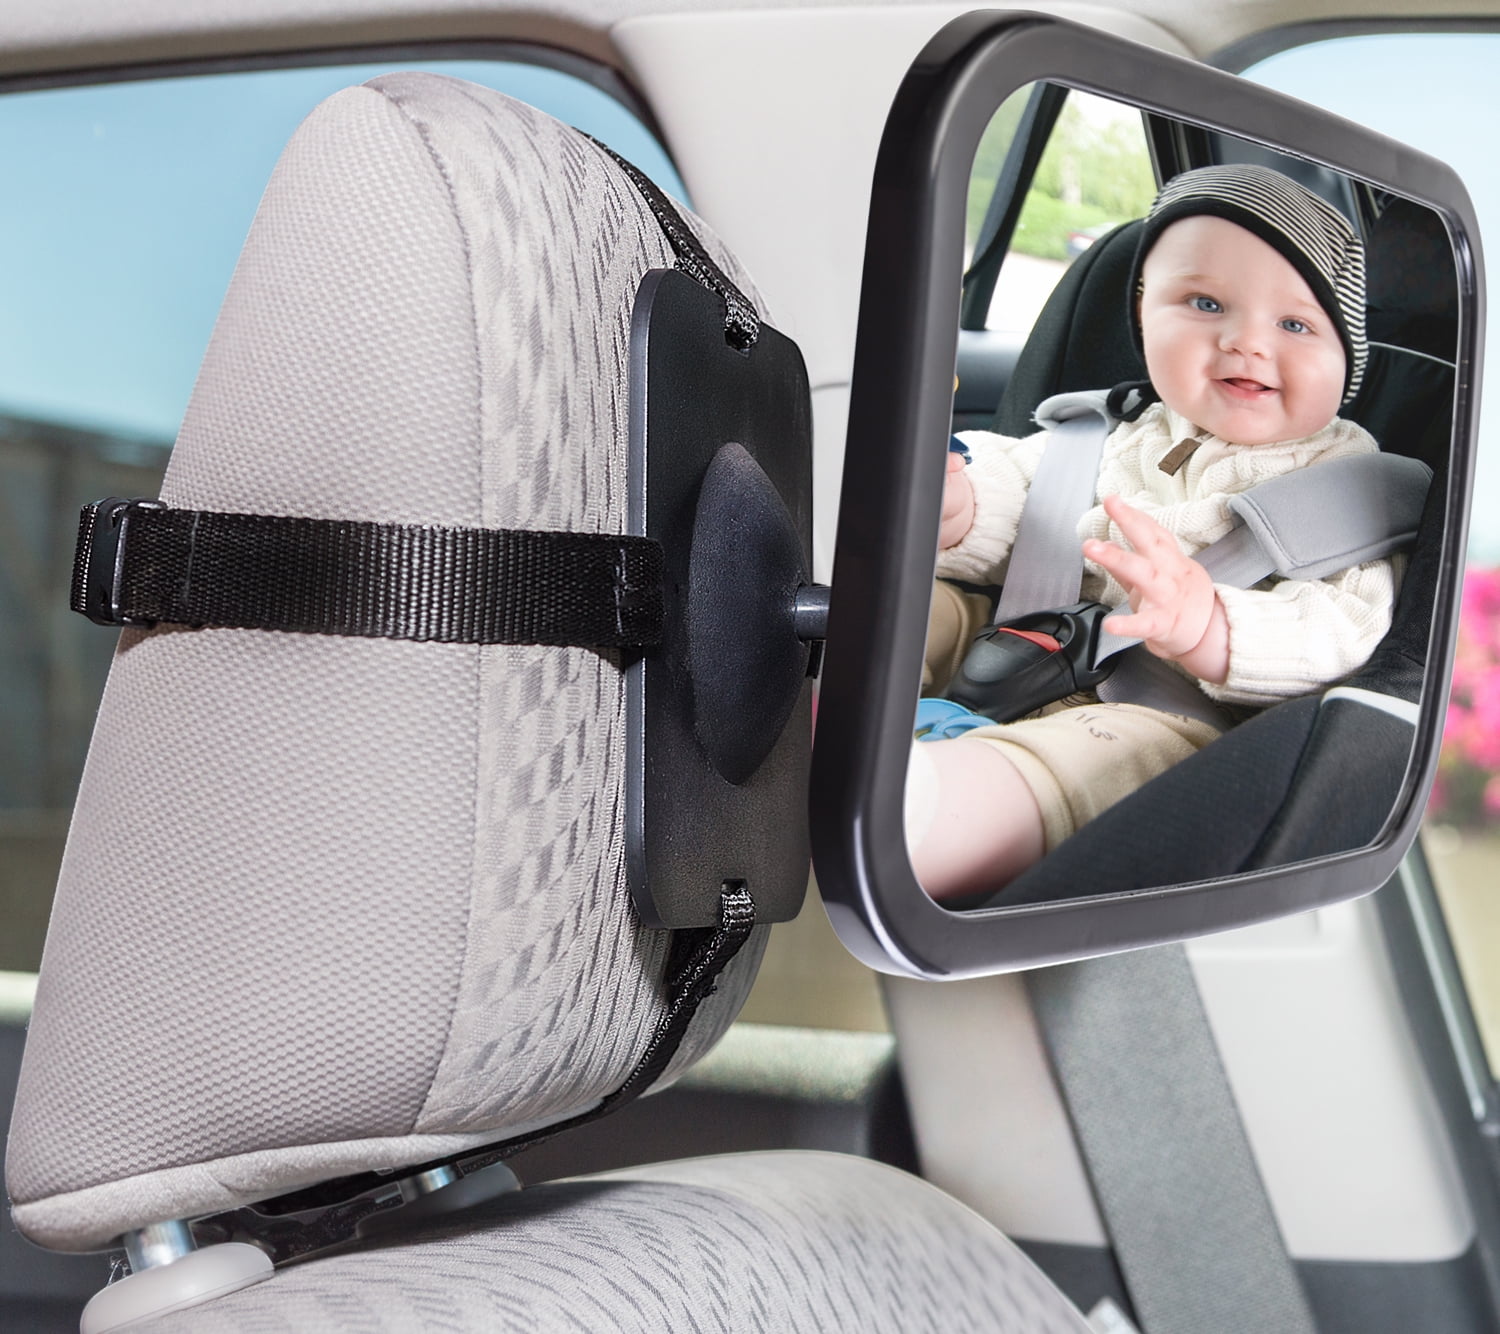 BABY BACKSEAT MIRROR FOR CAR Toddler Child Safety Facing Rear View Shatterproof 